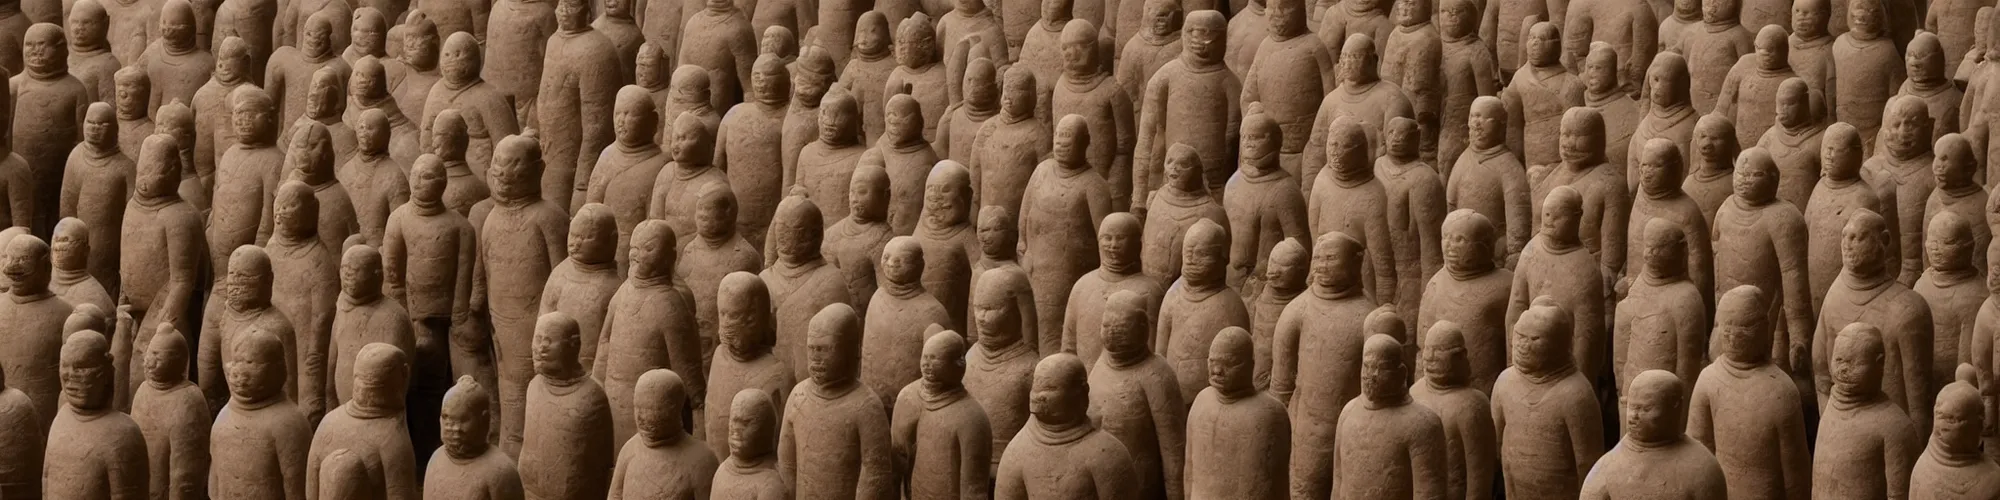 Image similar to hundreds of humans. A sea of humans. interconnected flesh. Melting clay golem humans. Dungeons&Dragons: Lemure. Lemure creature. Demonic scene. Many humans intertwined and woven together. Bodies and forms amesh. Terracotta army. Extremely unsettling artwork. Clay sculpture by Alberto Giacometti.